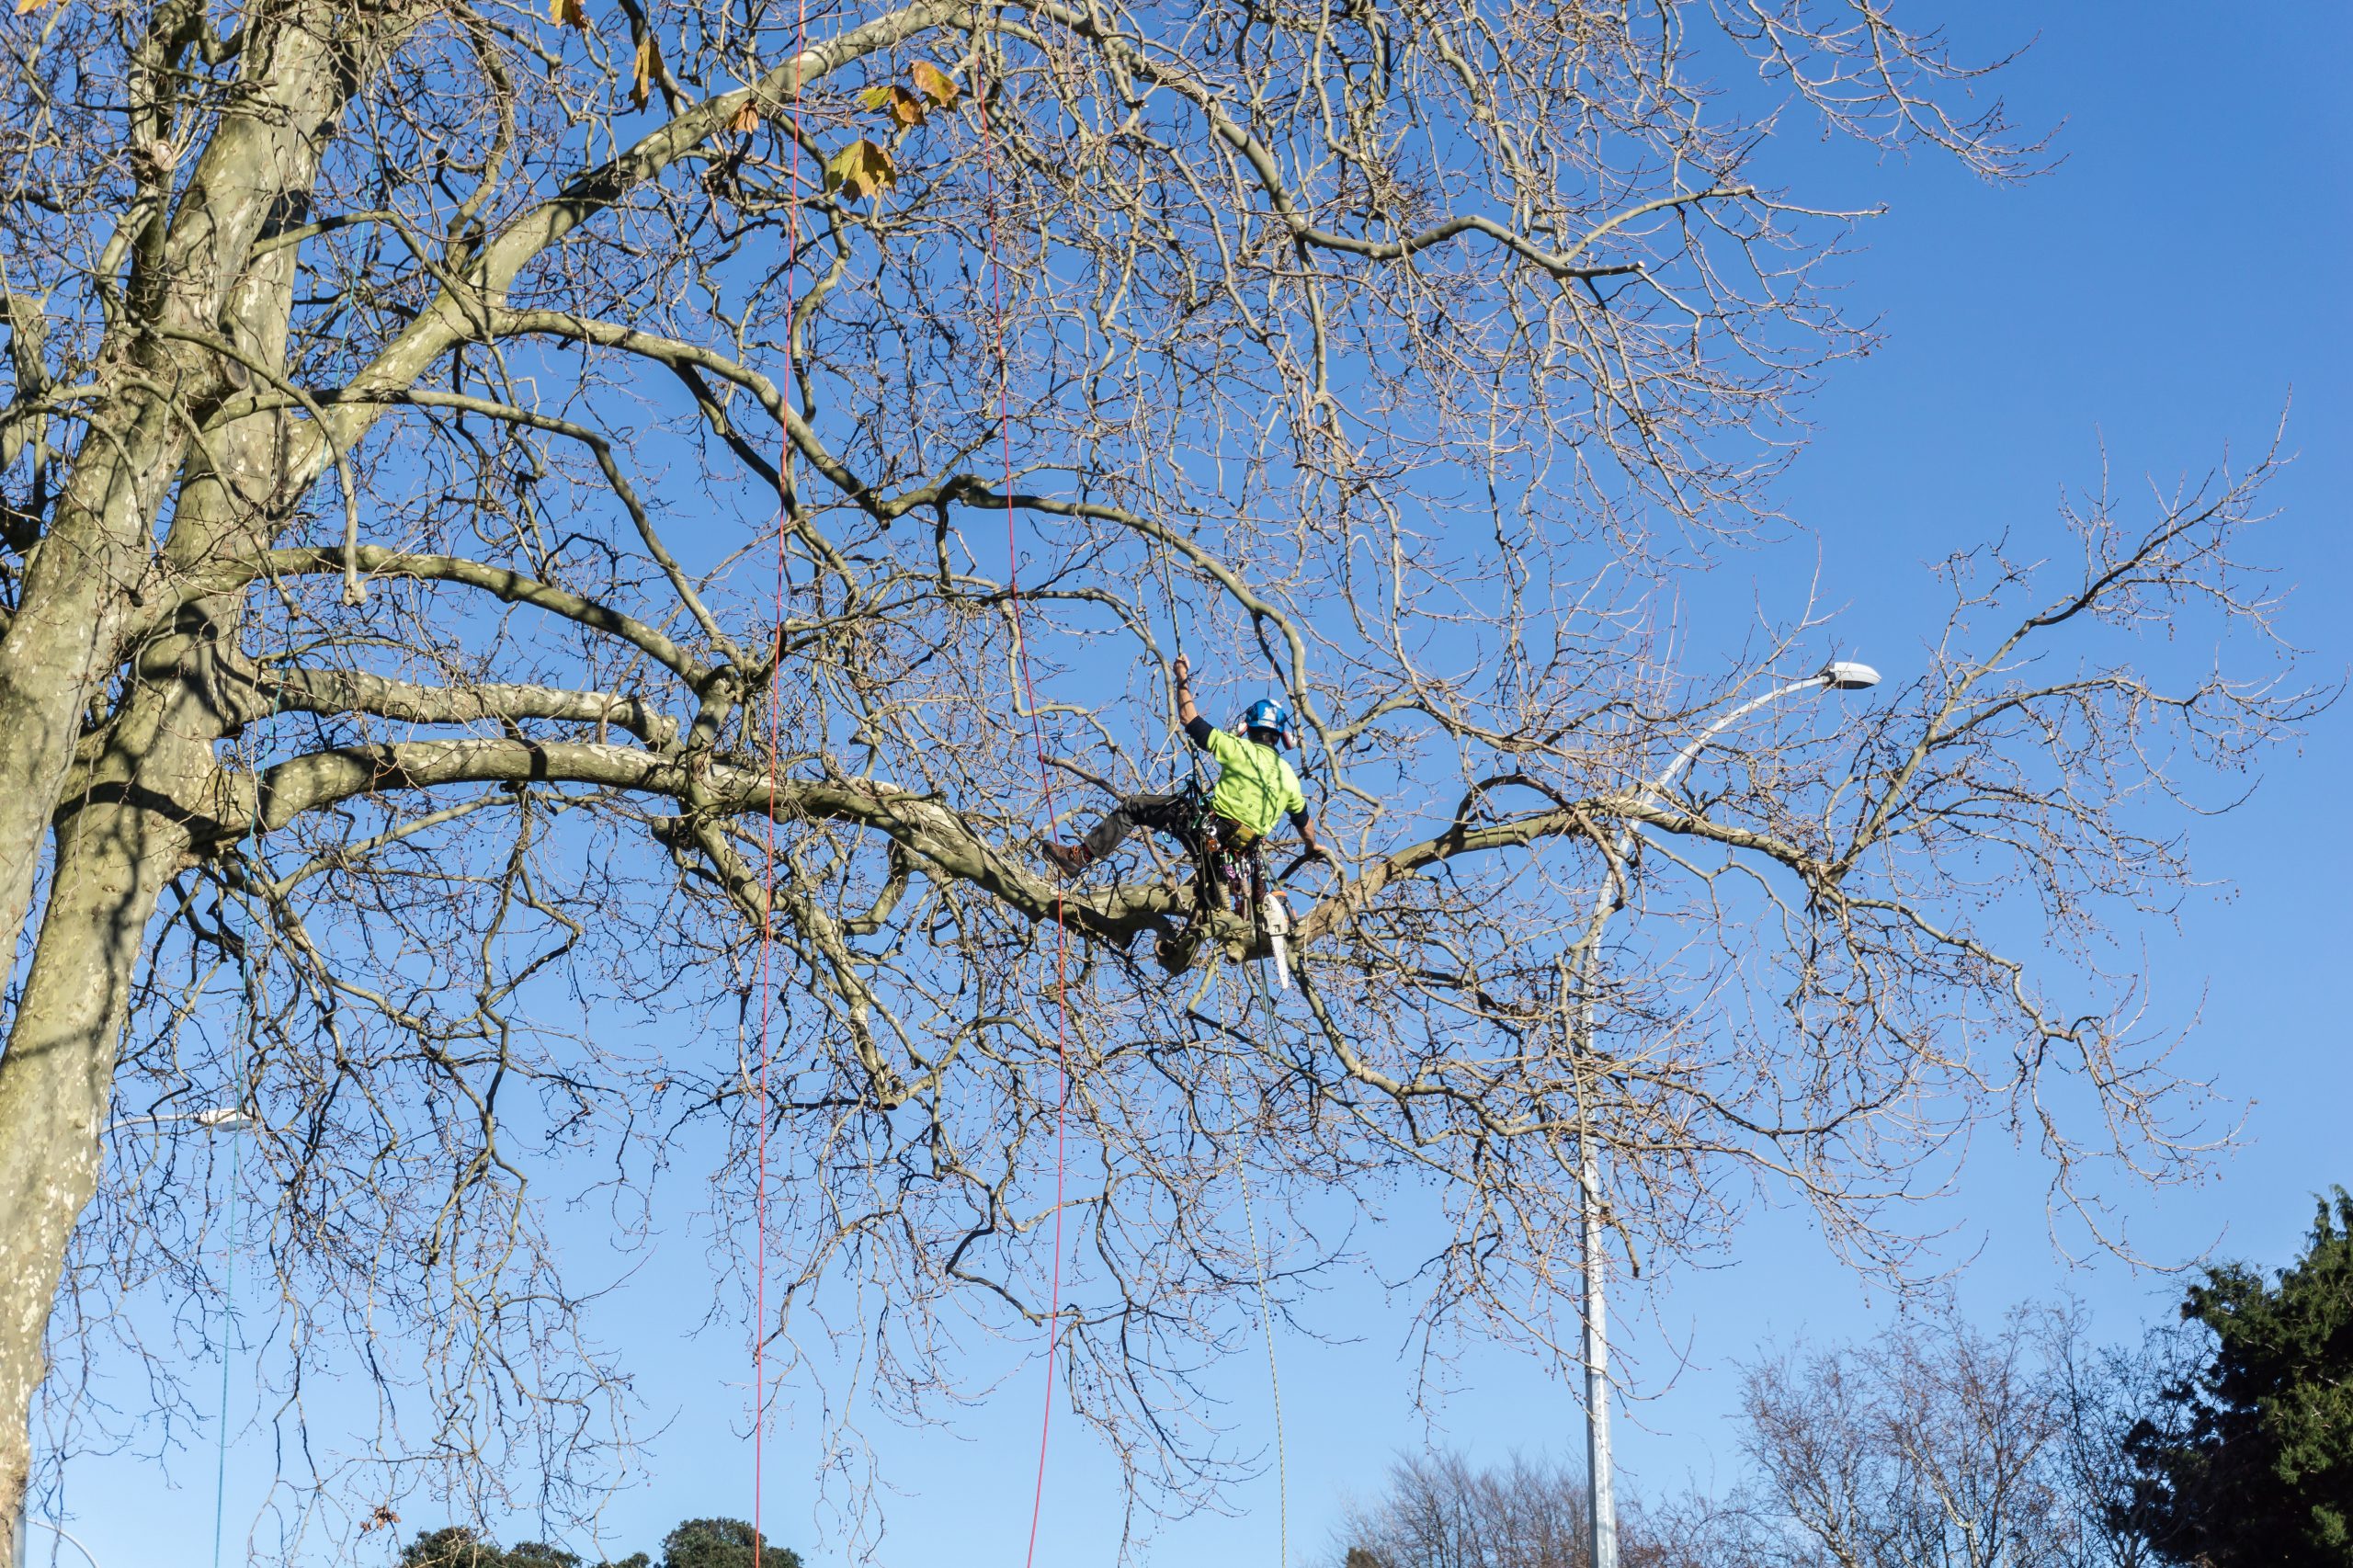 Arborist hanging by safety rope clambering about high in leafless London Plane tree trimming branches Tauranga New Zealand July 2018